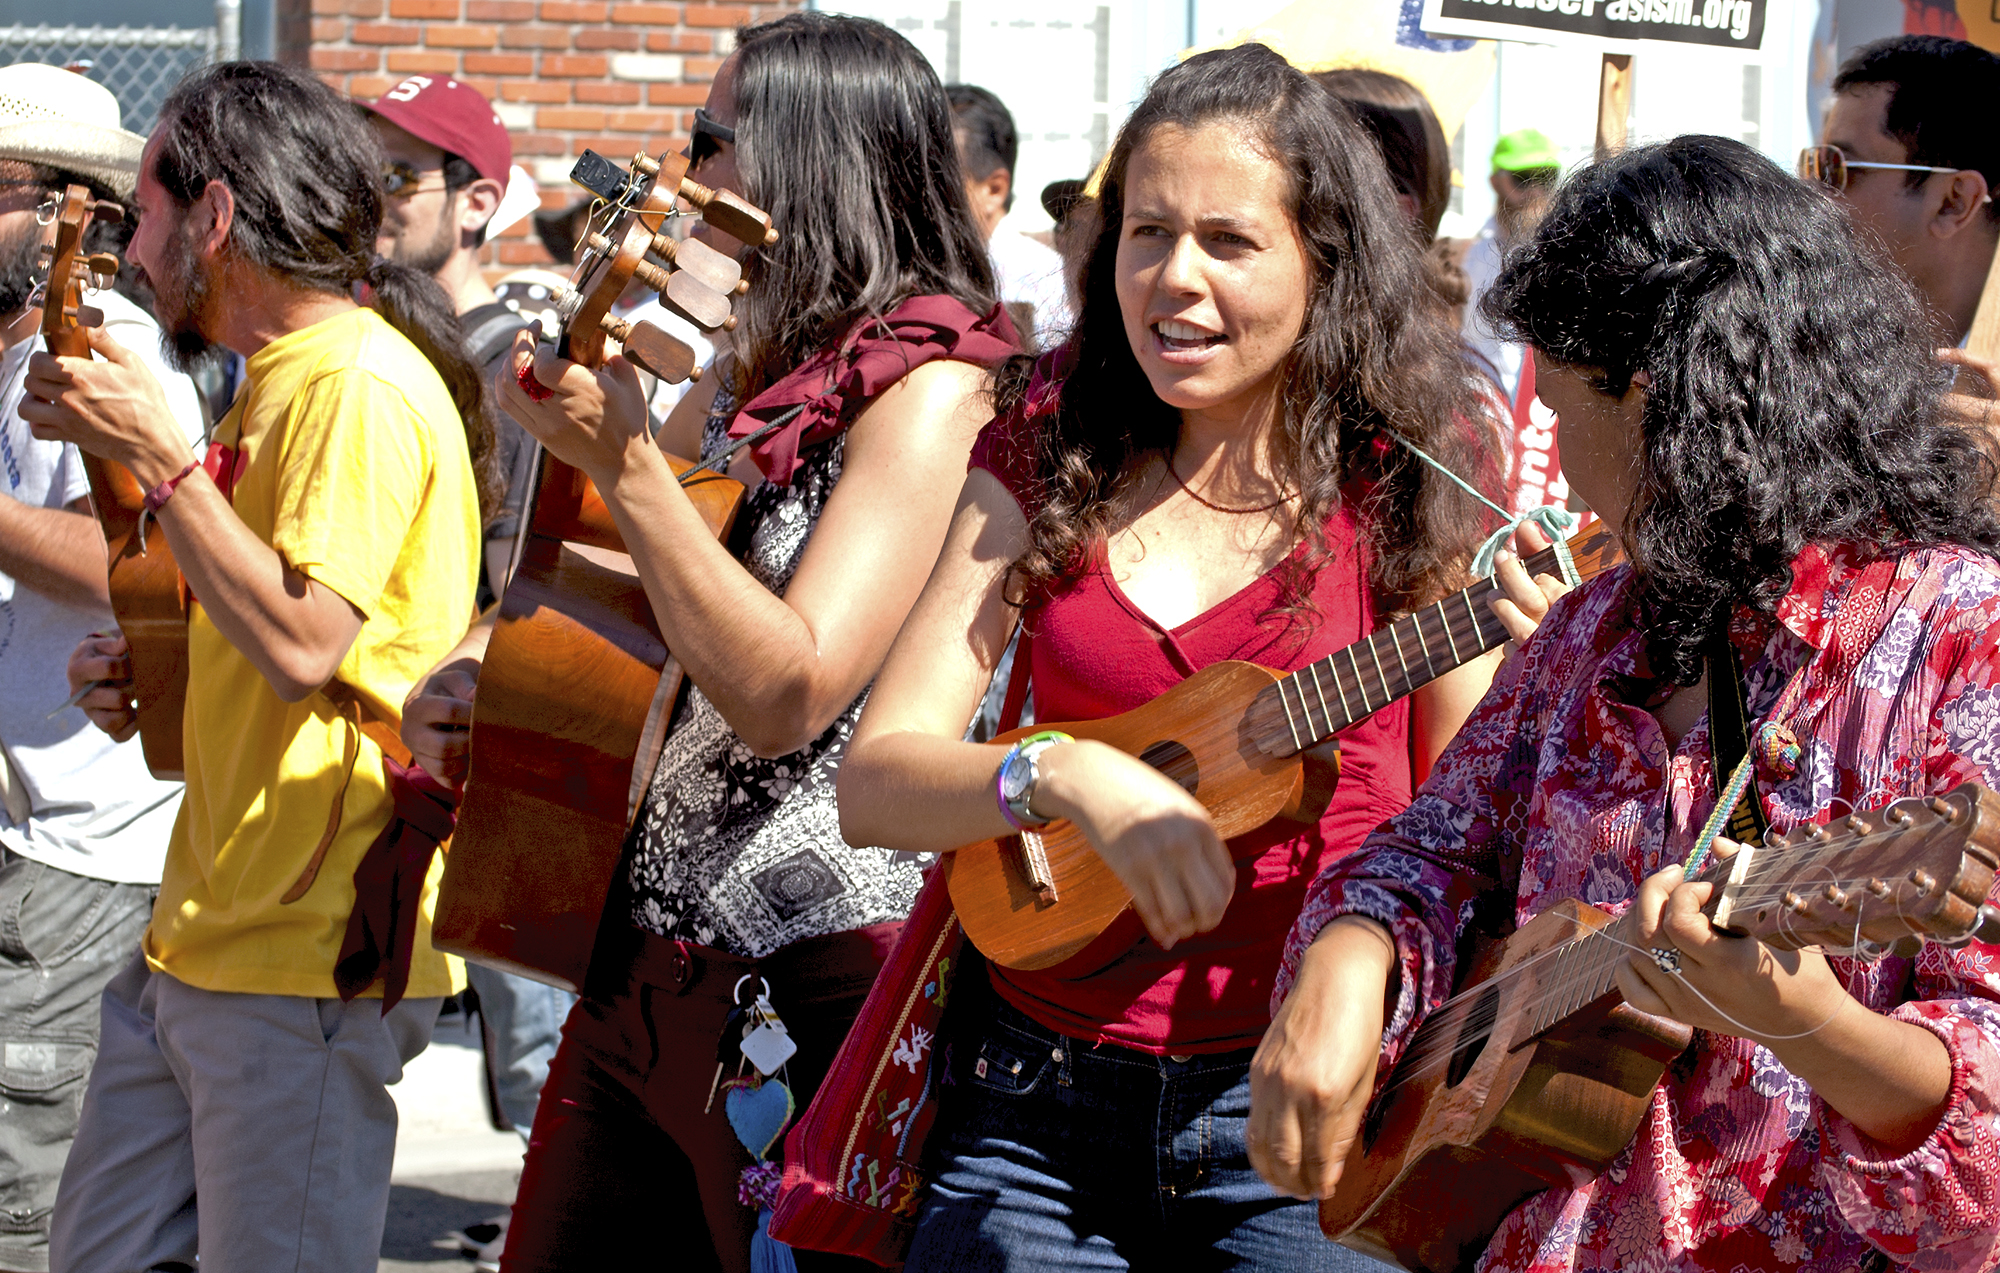 Musicians singing in Spanish lead the people in song.